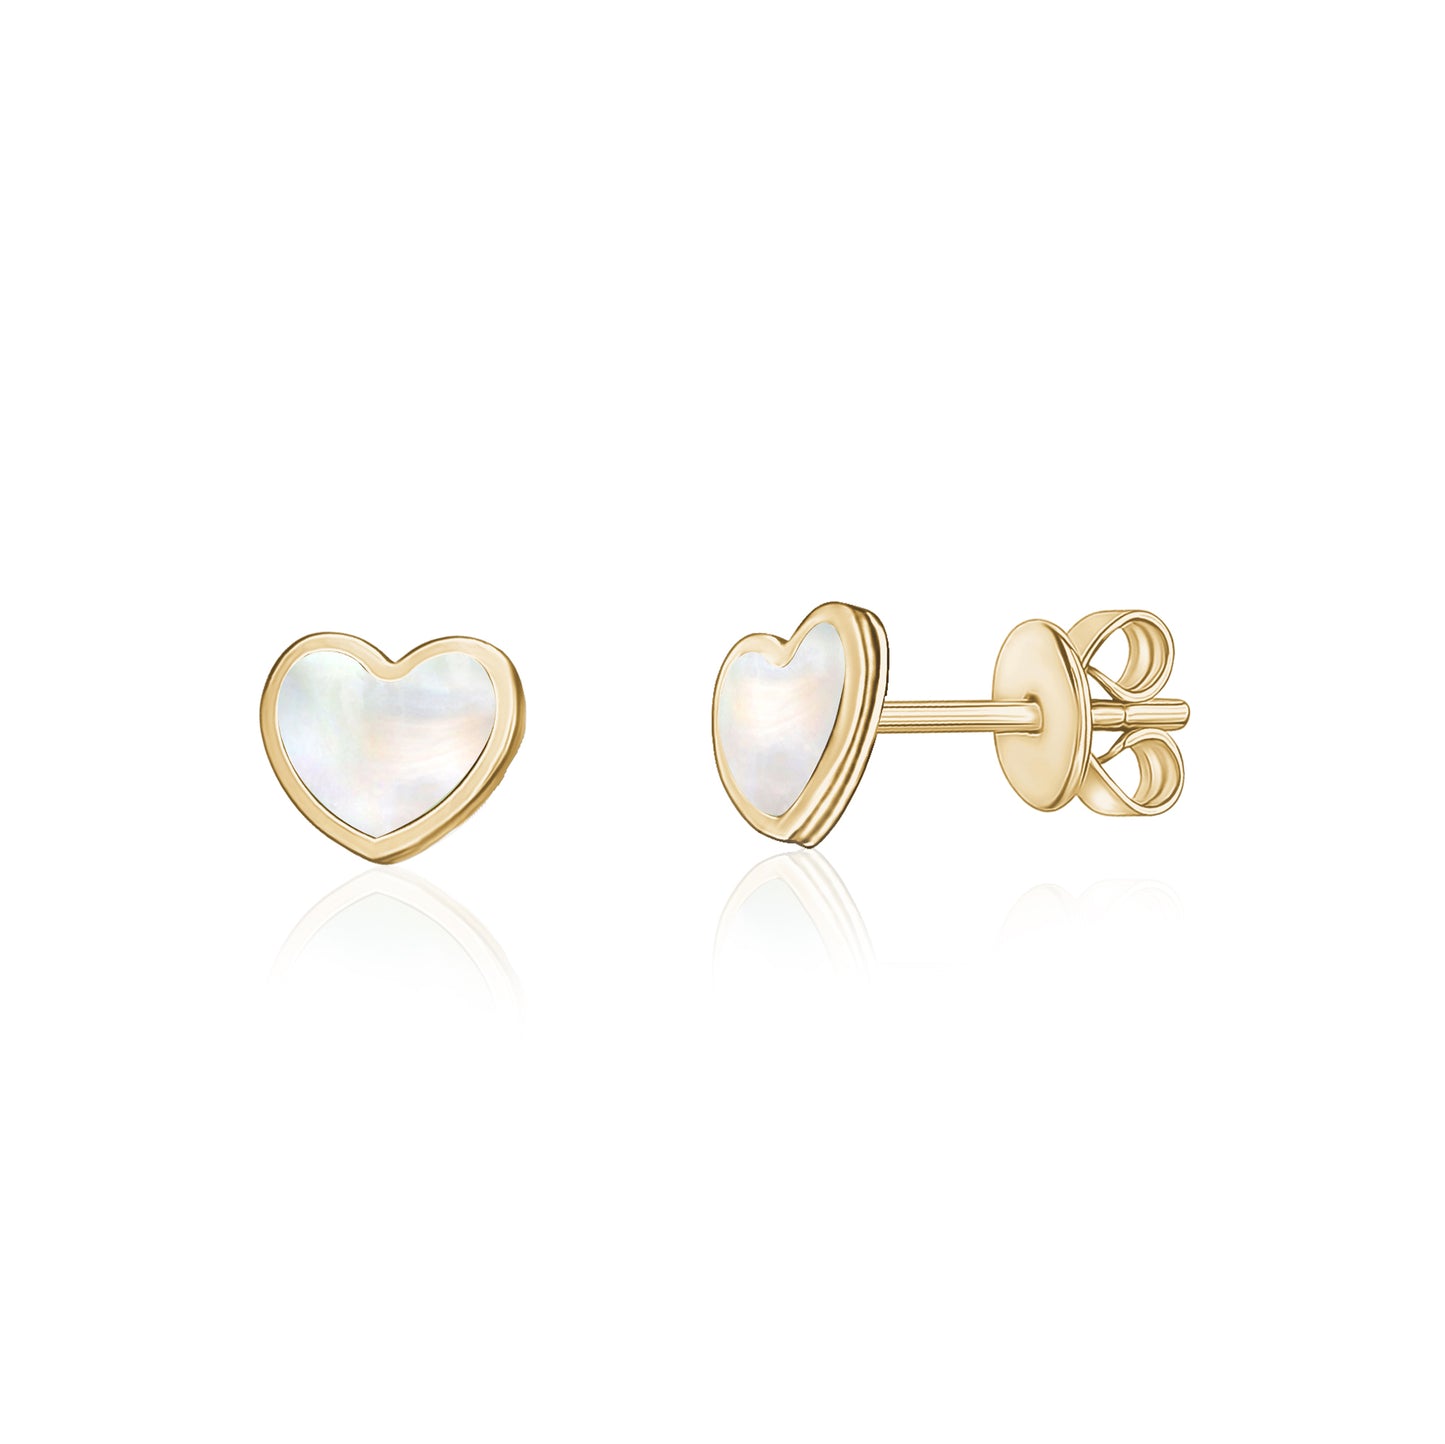 Small  Heart (Rounded) Earrings